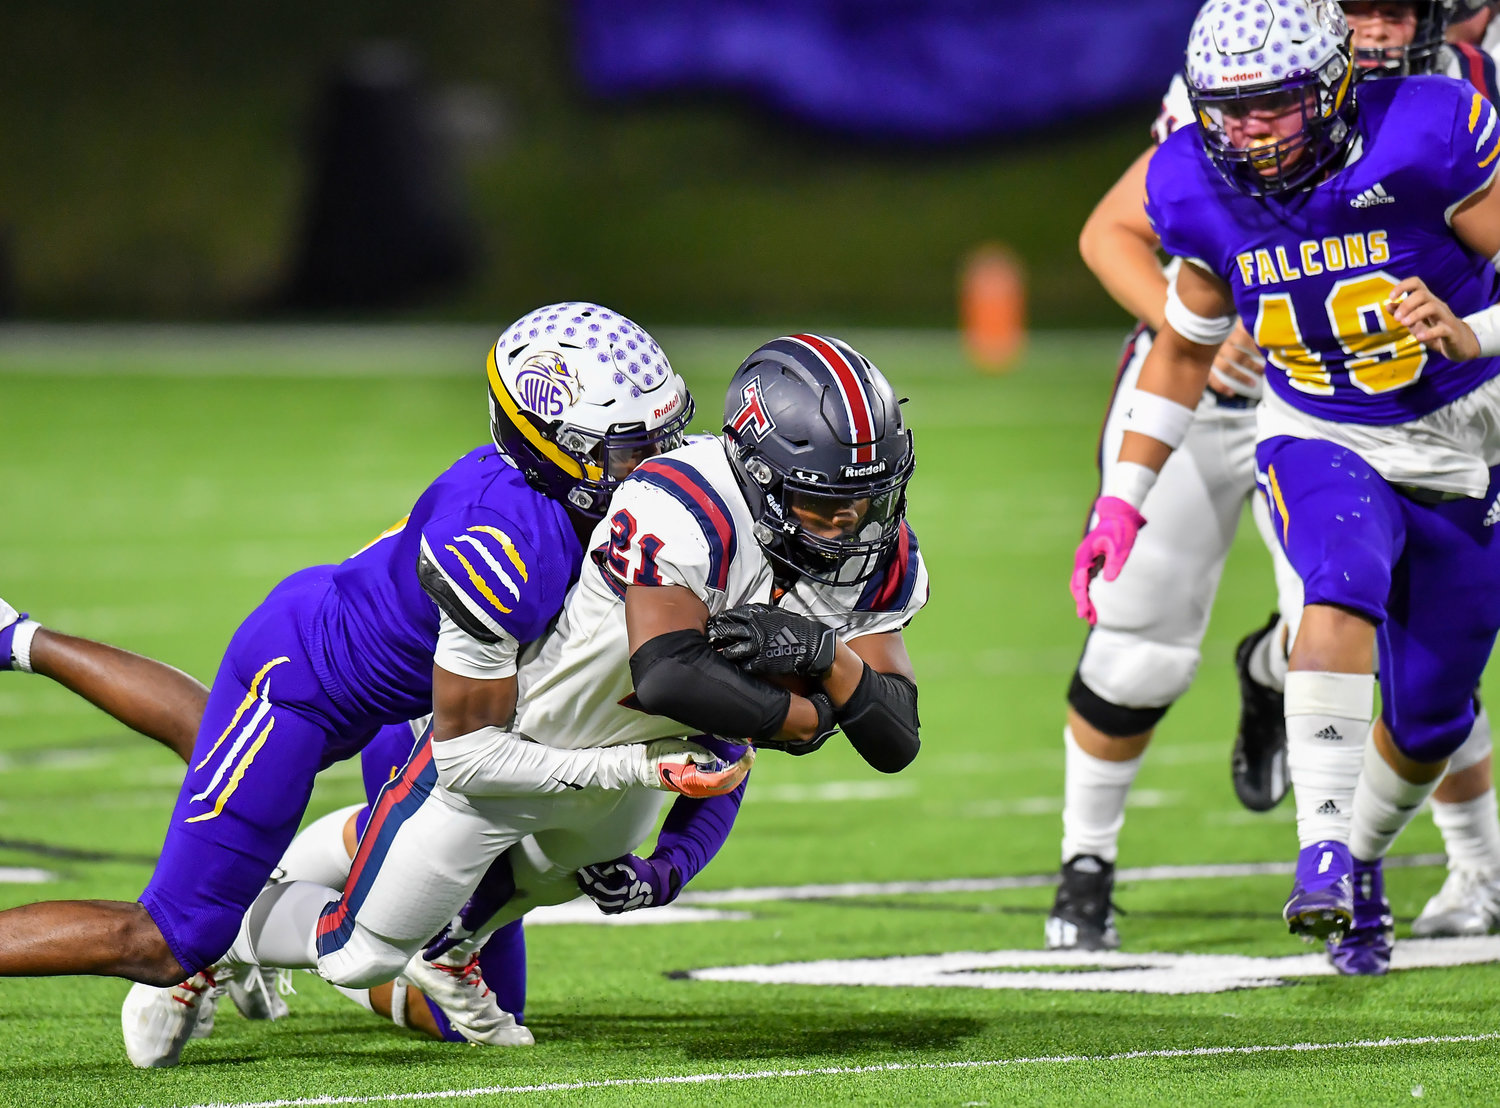 Houston Tx. Nov 19, 2021: Tompkins #21 Caleb Blocker rushes up the middle for a first down during first half of the UIL area playoff game between Tompkins and Jersey Village at Pridgeon Stadium in Houston. (Photo by Mark Goodman / Katy Times)